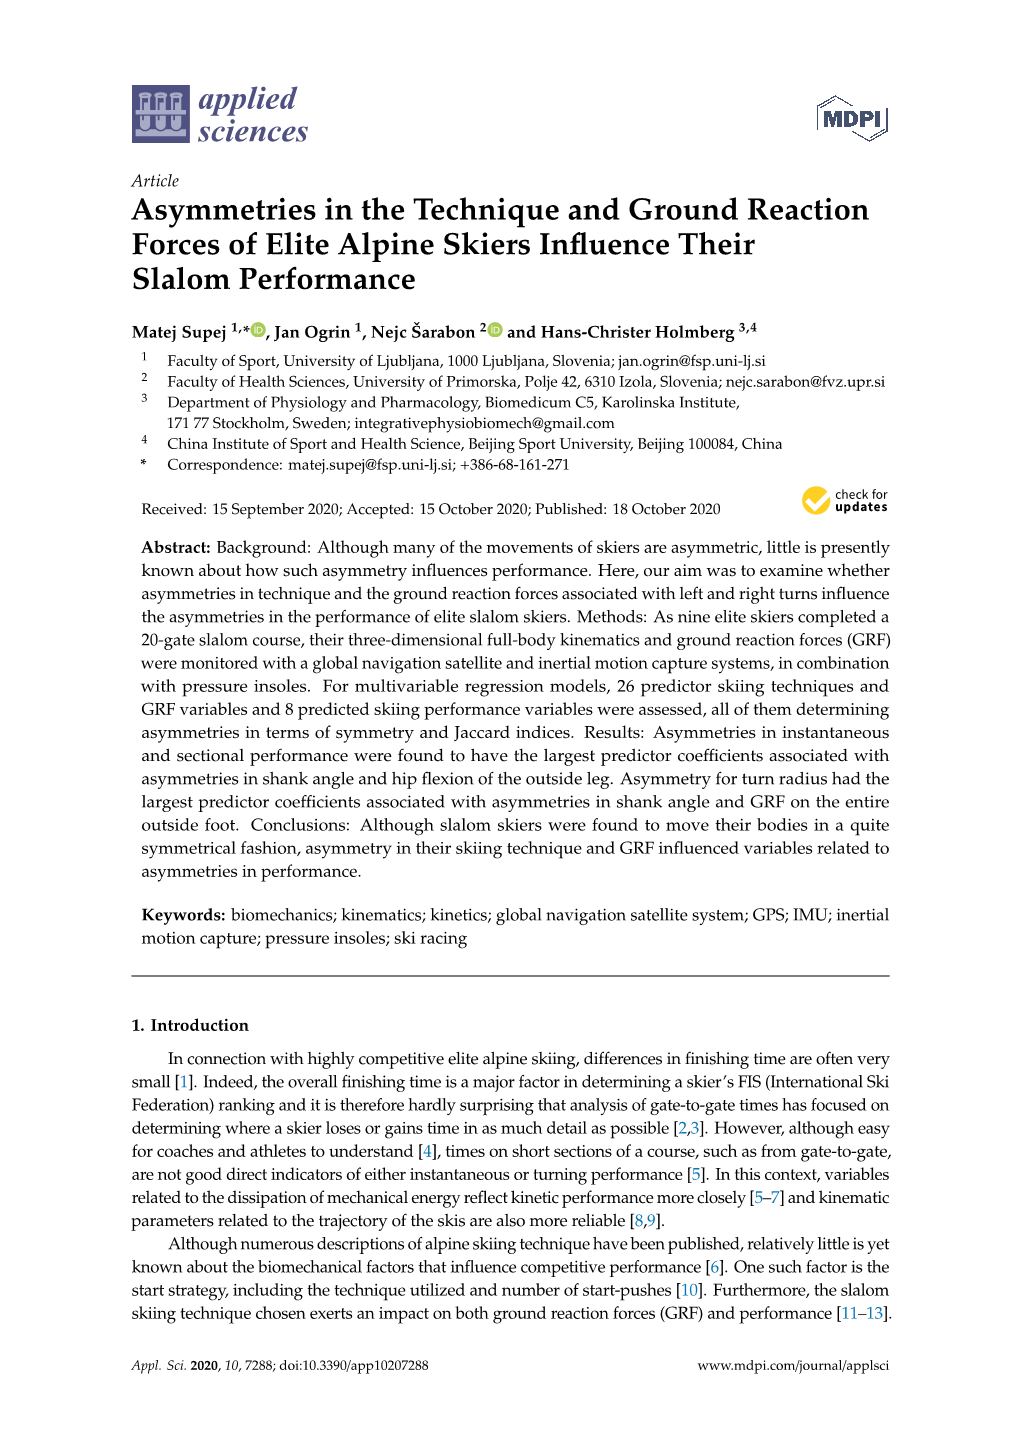 Asymmetries in the Technique and Ground Reaction Forces of Elite Alpine Skiers Inﬂuence Their Slalom Performance